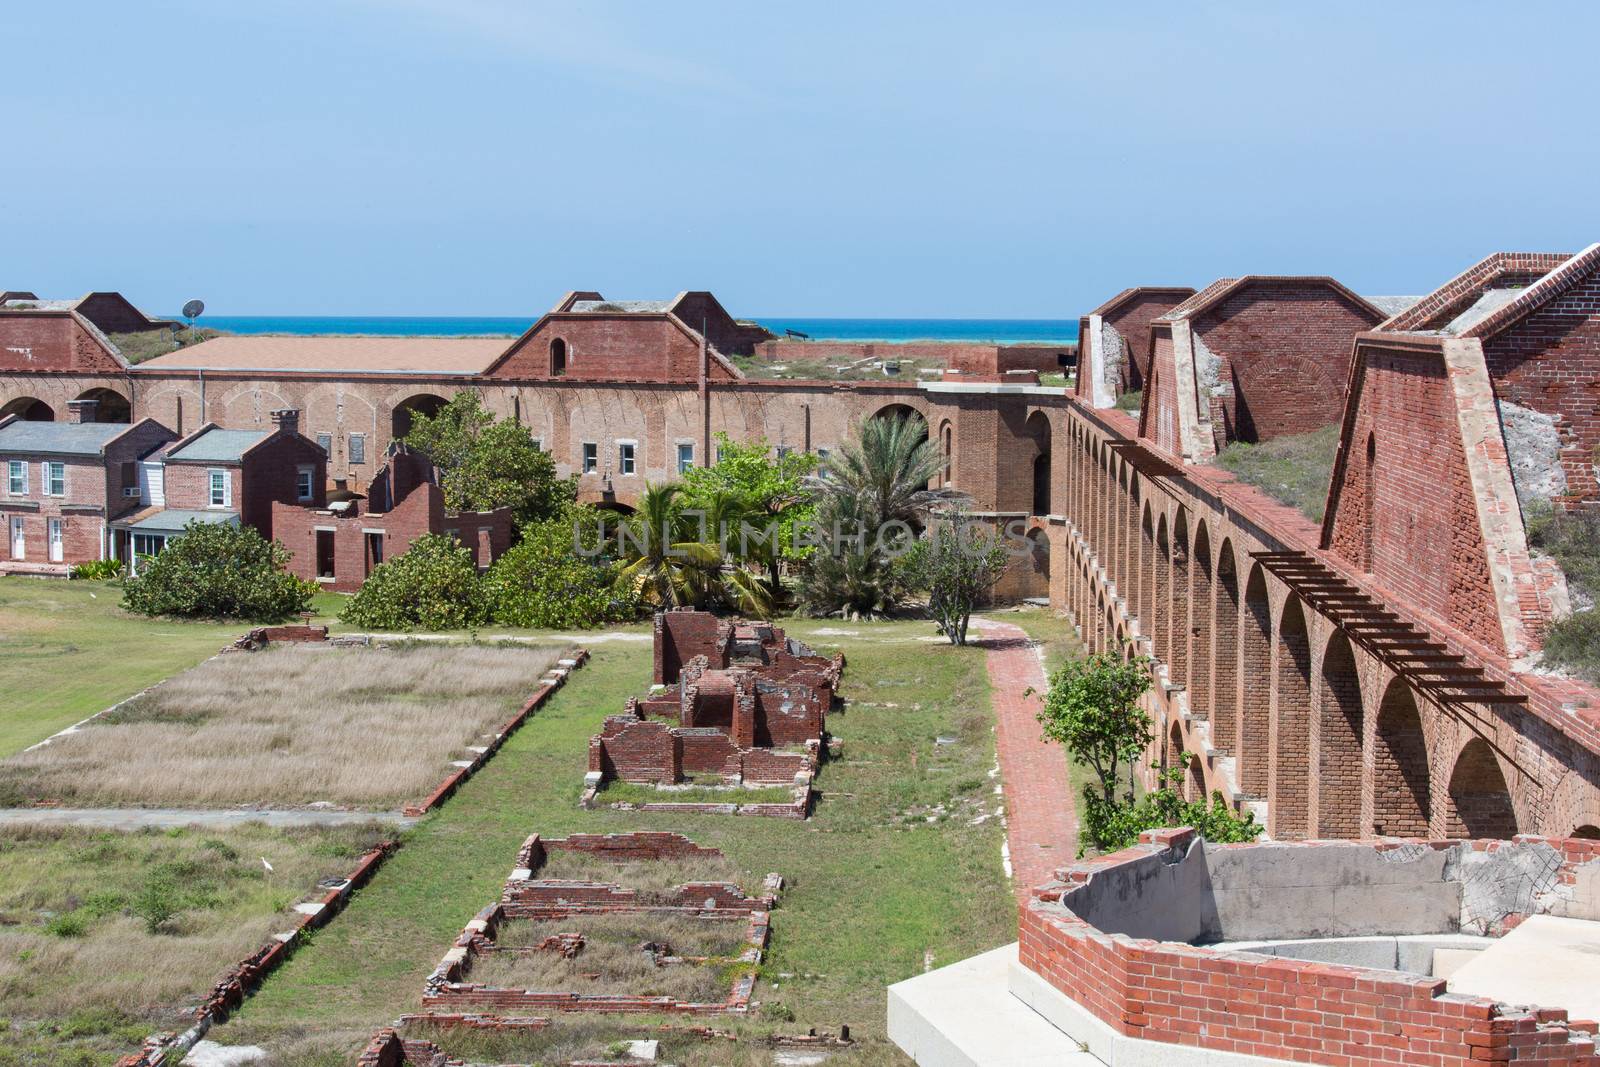 Garden Key in the Dry Tortugas is the site of the historic Fort Jefferson. Although manned for several years, changes in naval warfare outmoded the fort before it could be completed.